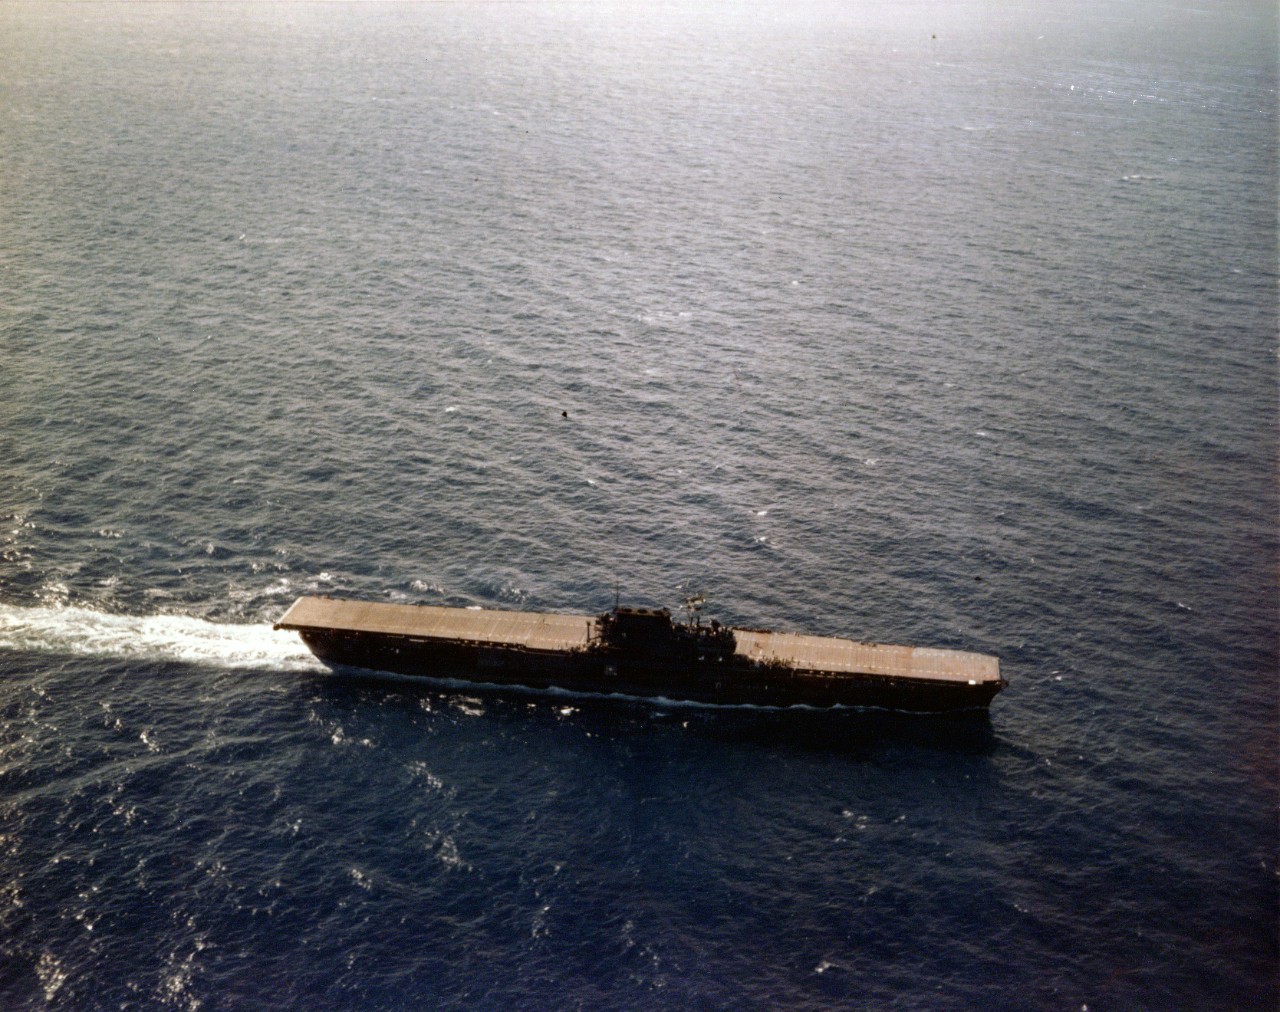 Enterprise turns into the wind to recover planes while steaming in the Pacific, circa June 1941. Note her natural wooden flight deck stain and the Measure 1 camouflage paint scheme. The following month the ships company will stain her flight deck...